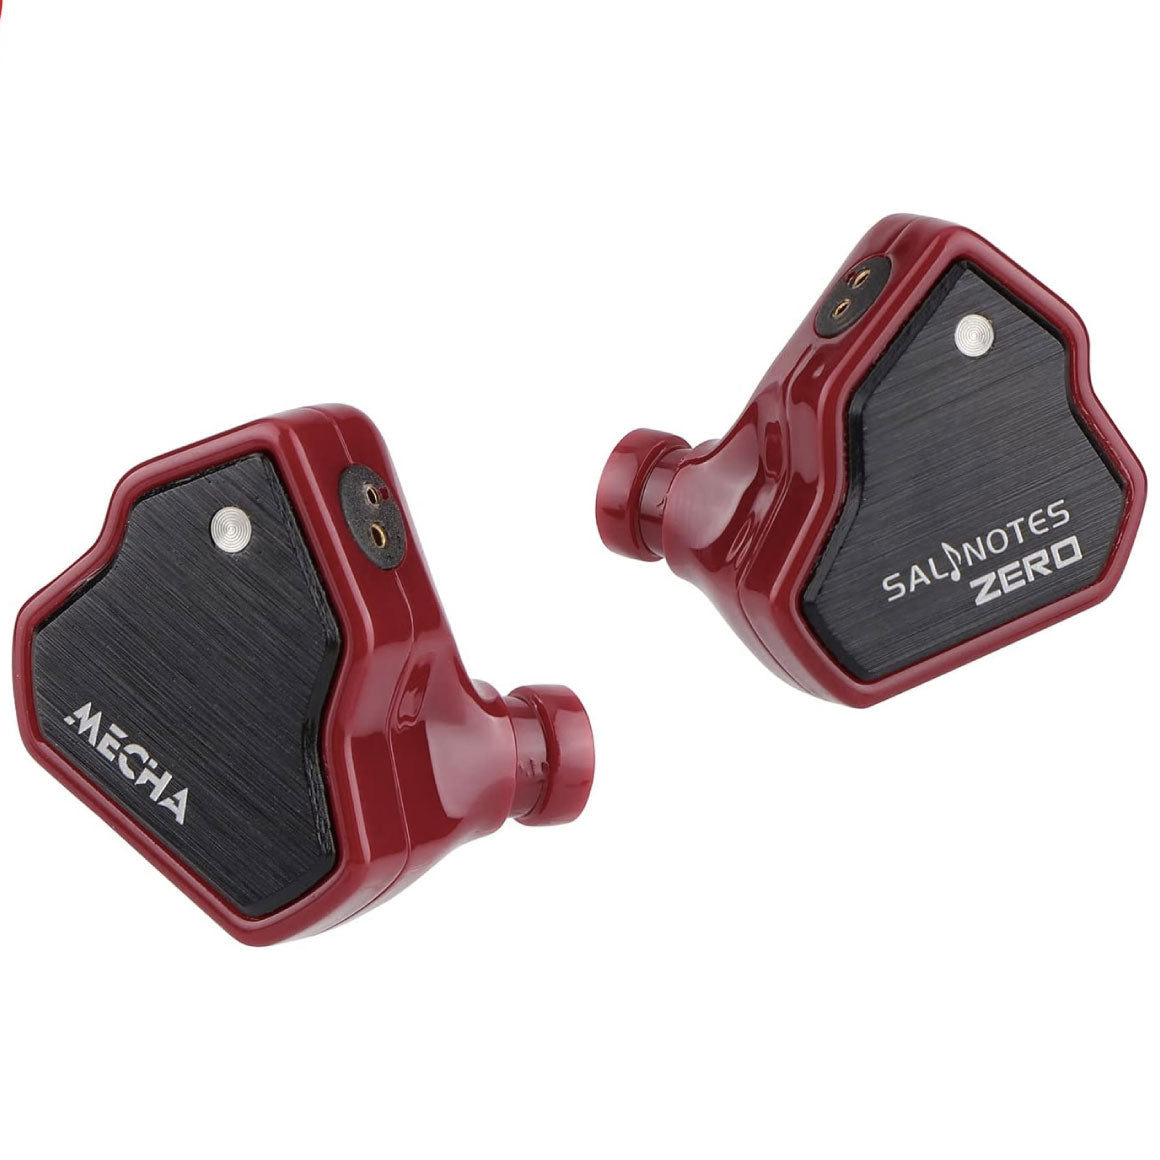 Headphone-Zone-7HZ-Salnotes-Zer0-3.5mm-with-mic-red